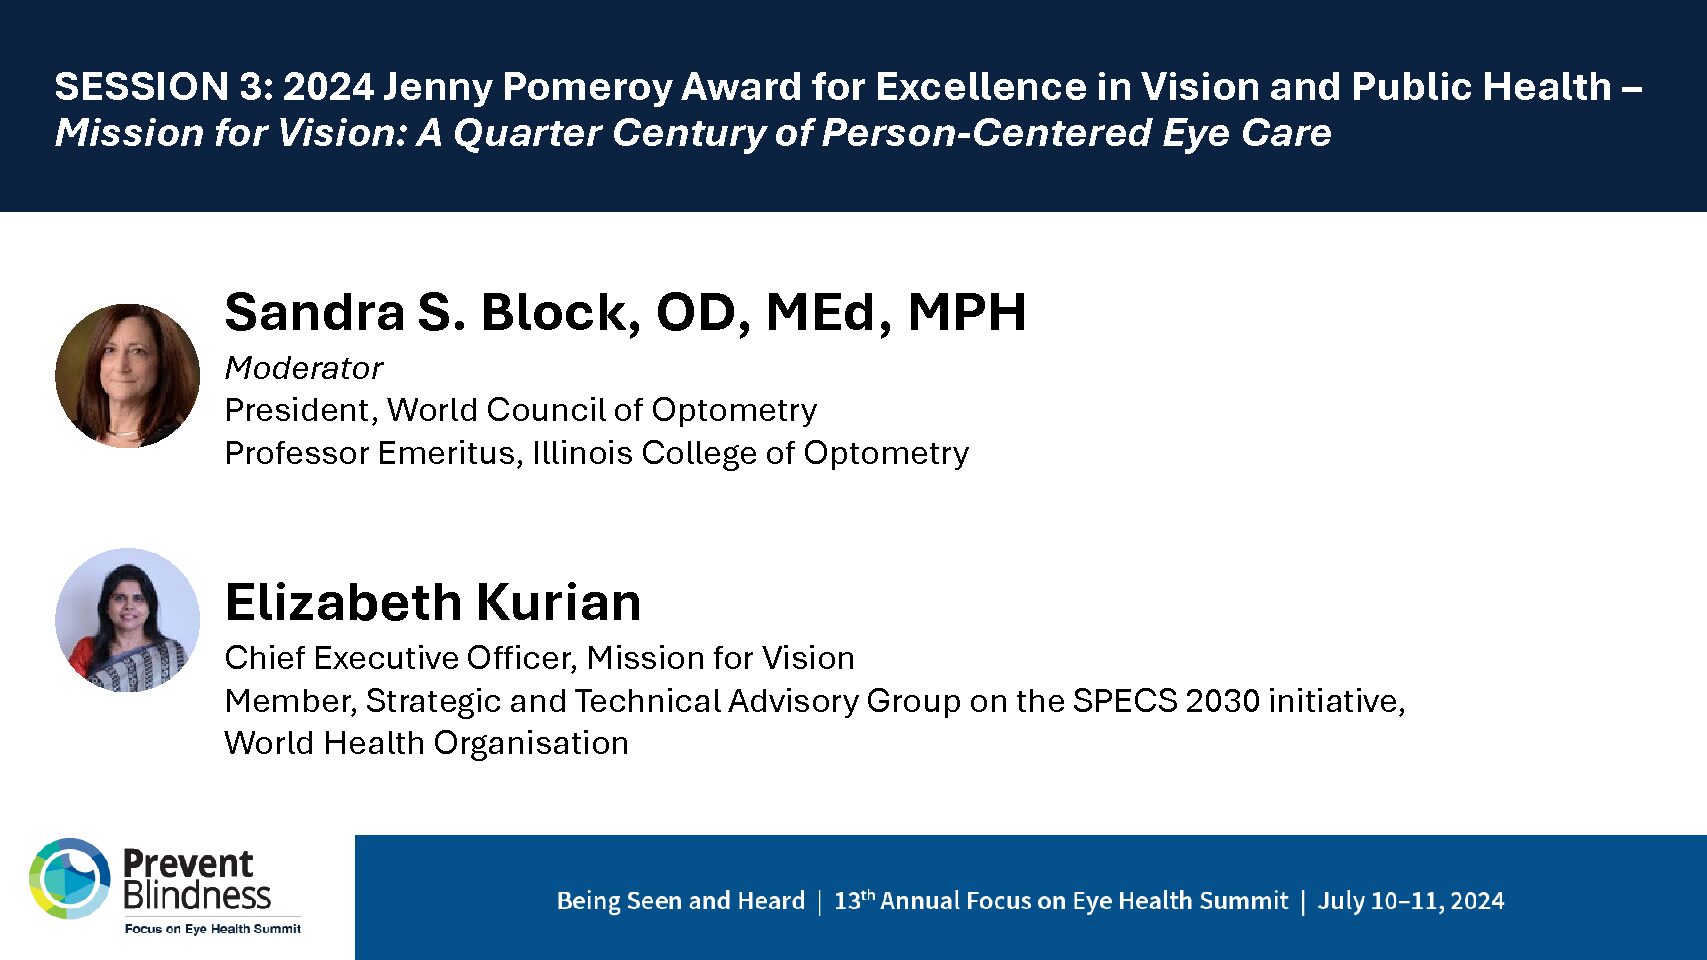 Mission for Vision: A Quarter Century of Person-Centered Eye Care